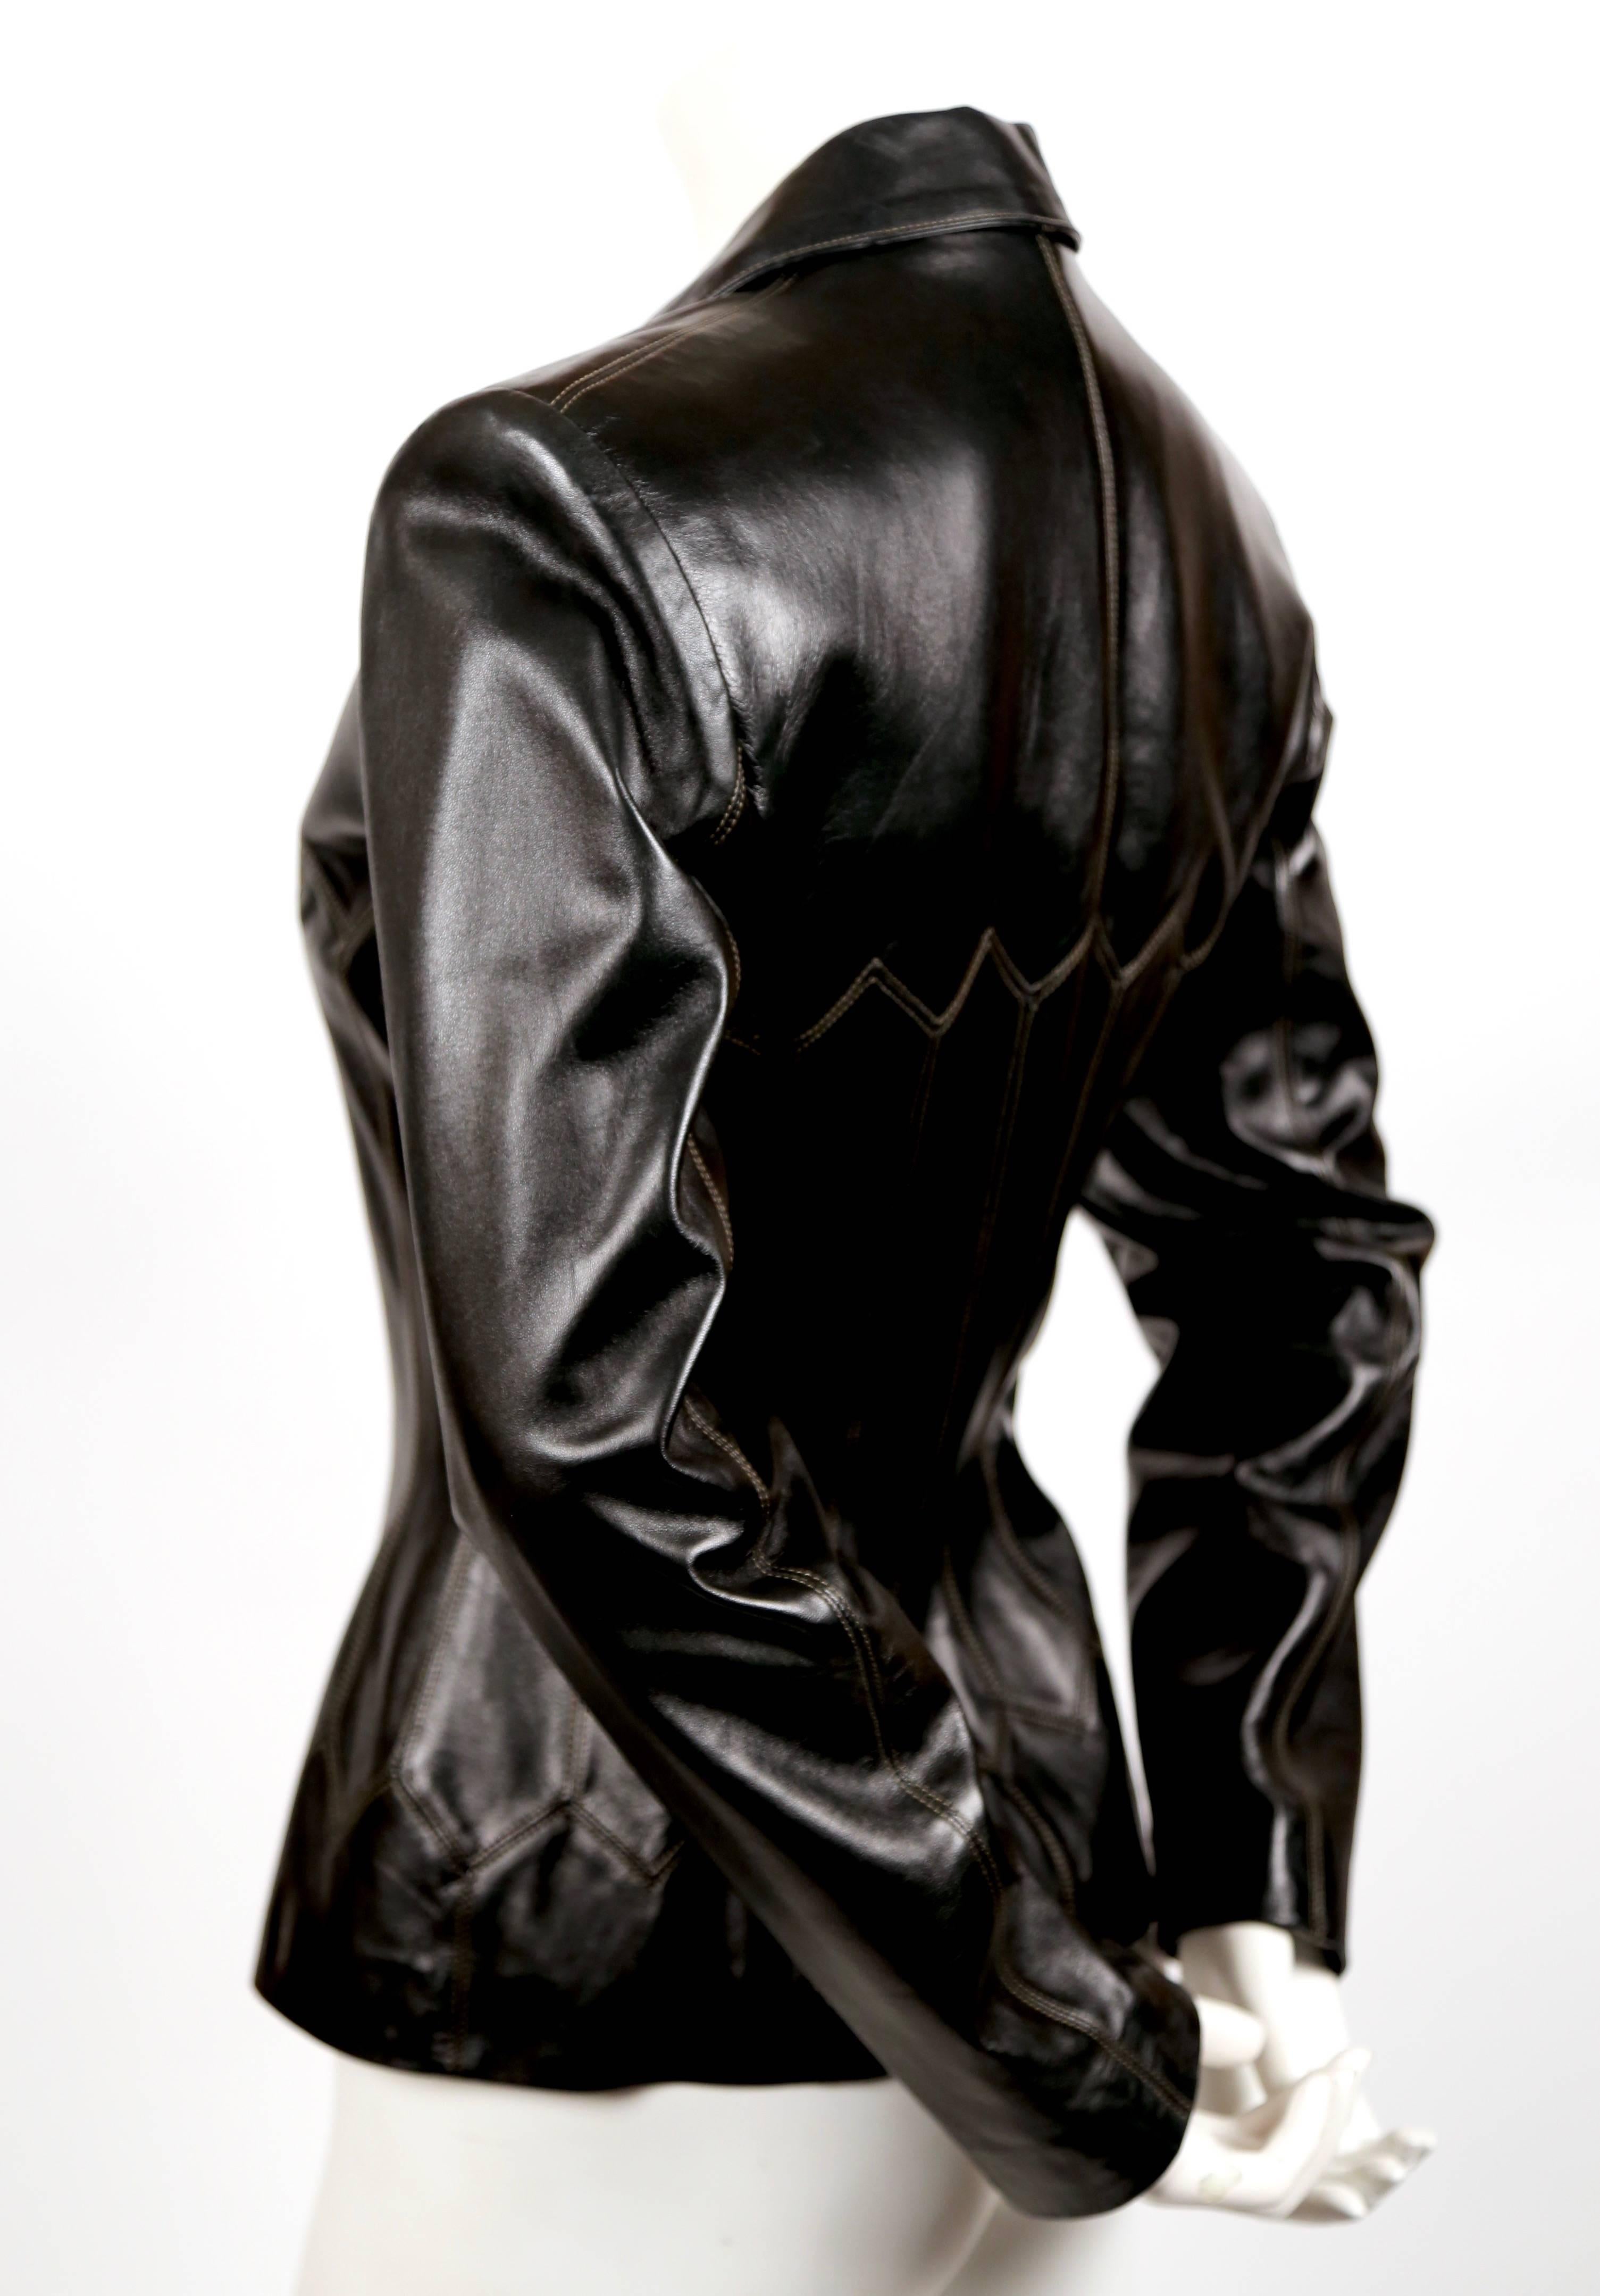 Jet black butter soft leather corset style jacket with decorative topstitching from Alaia dating to spring 1990 exactly as seen on the runway. French size 38 although this jacket is very small and best fits a US size 2 or French 36. Approximate